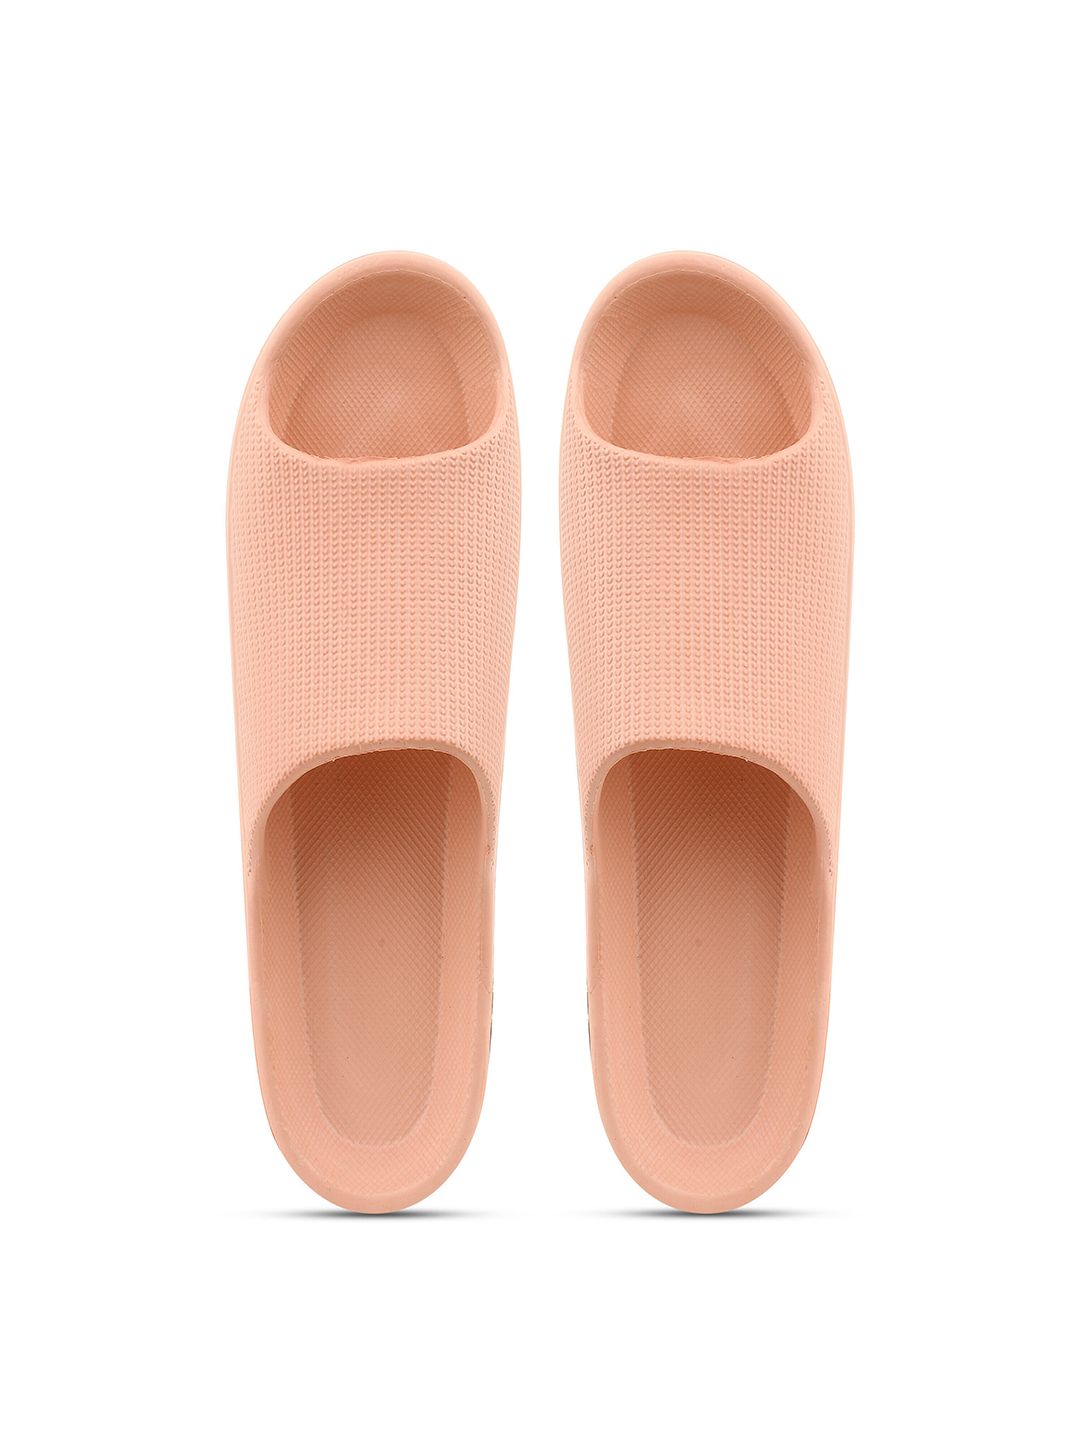 BEONZA Women Rose Gold Sliders Price in India